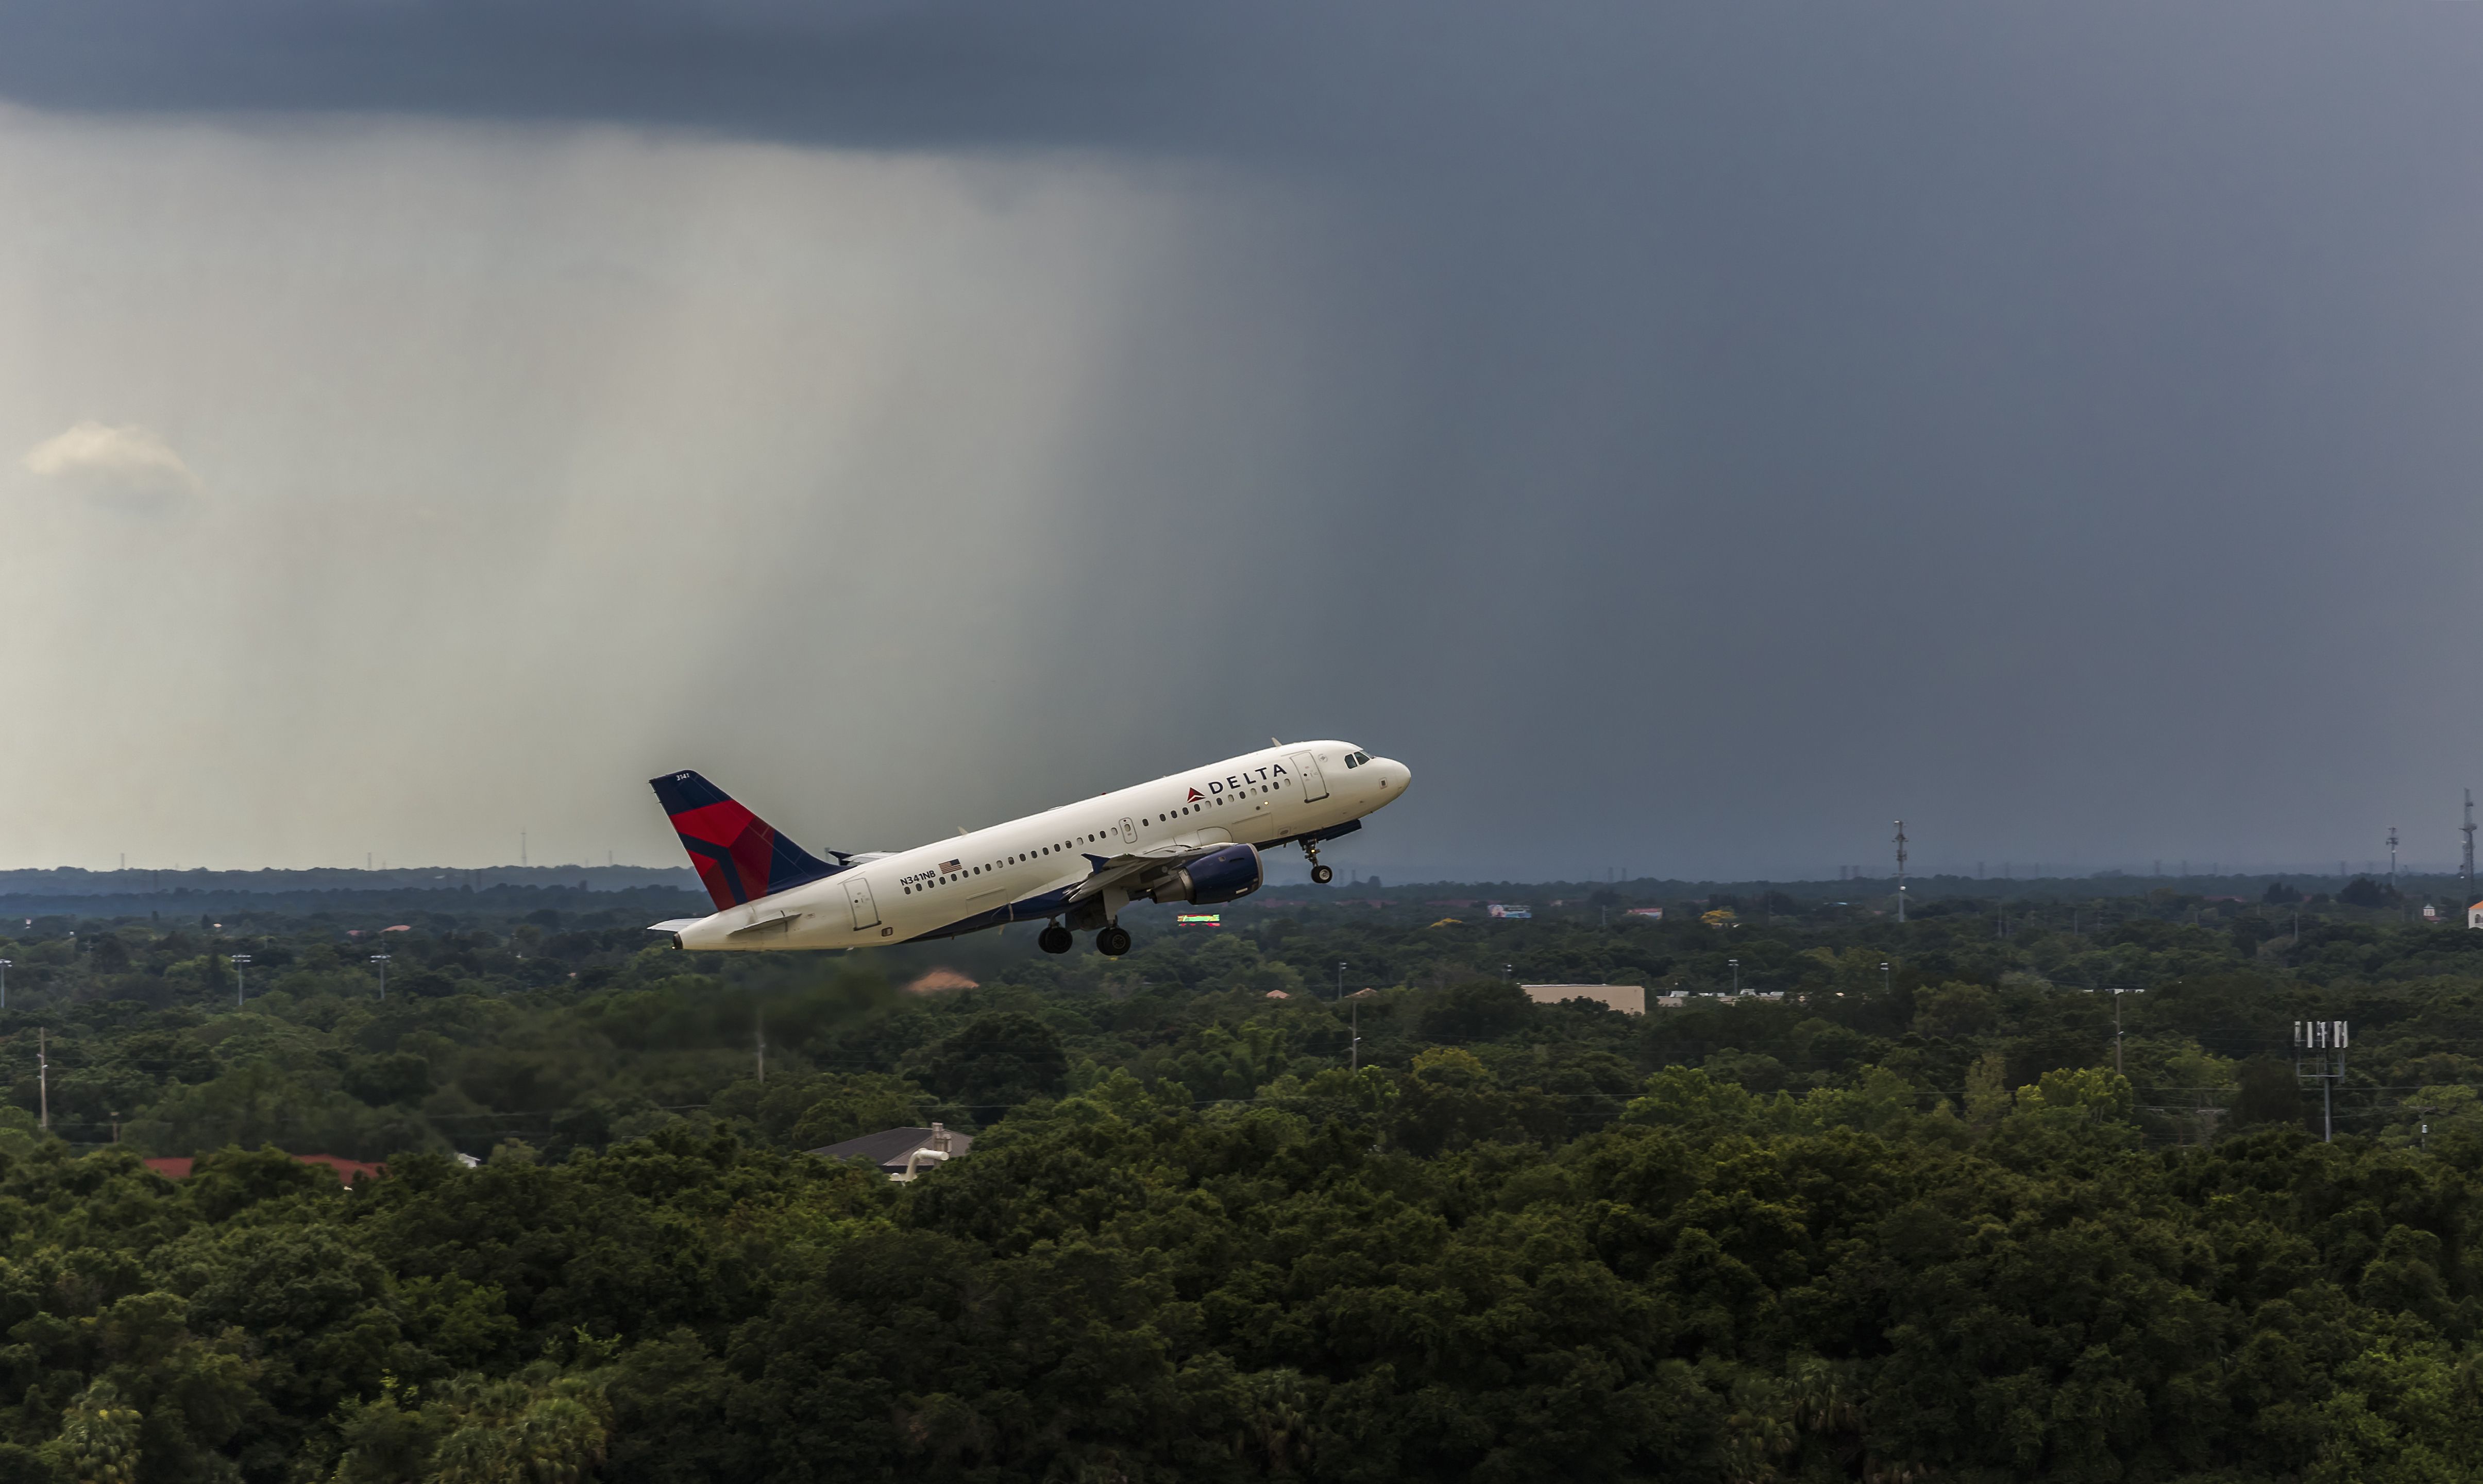 Delta Air Lines Airbus A319 departing from Tampa International Airport with storm in the background.